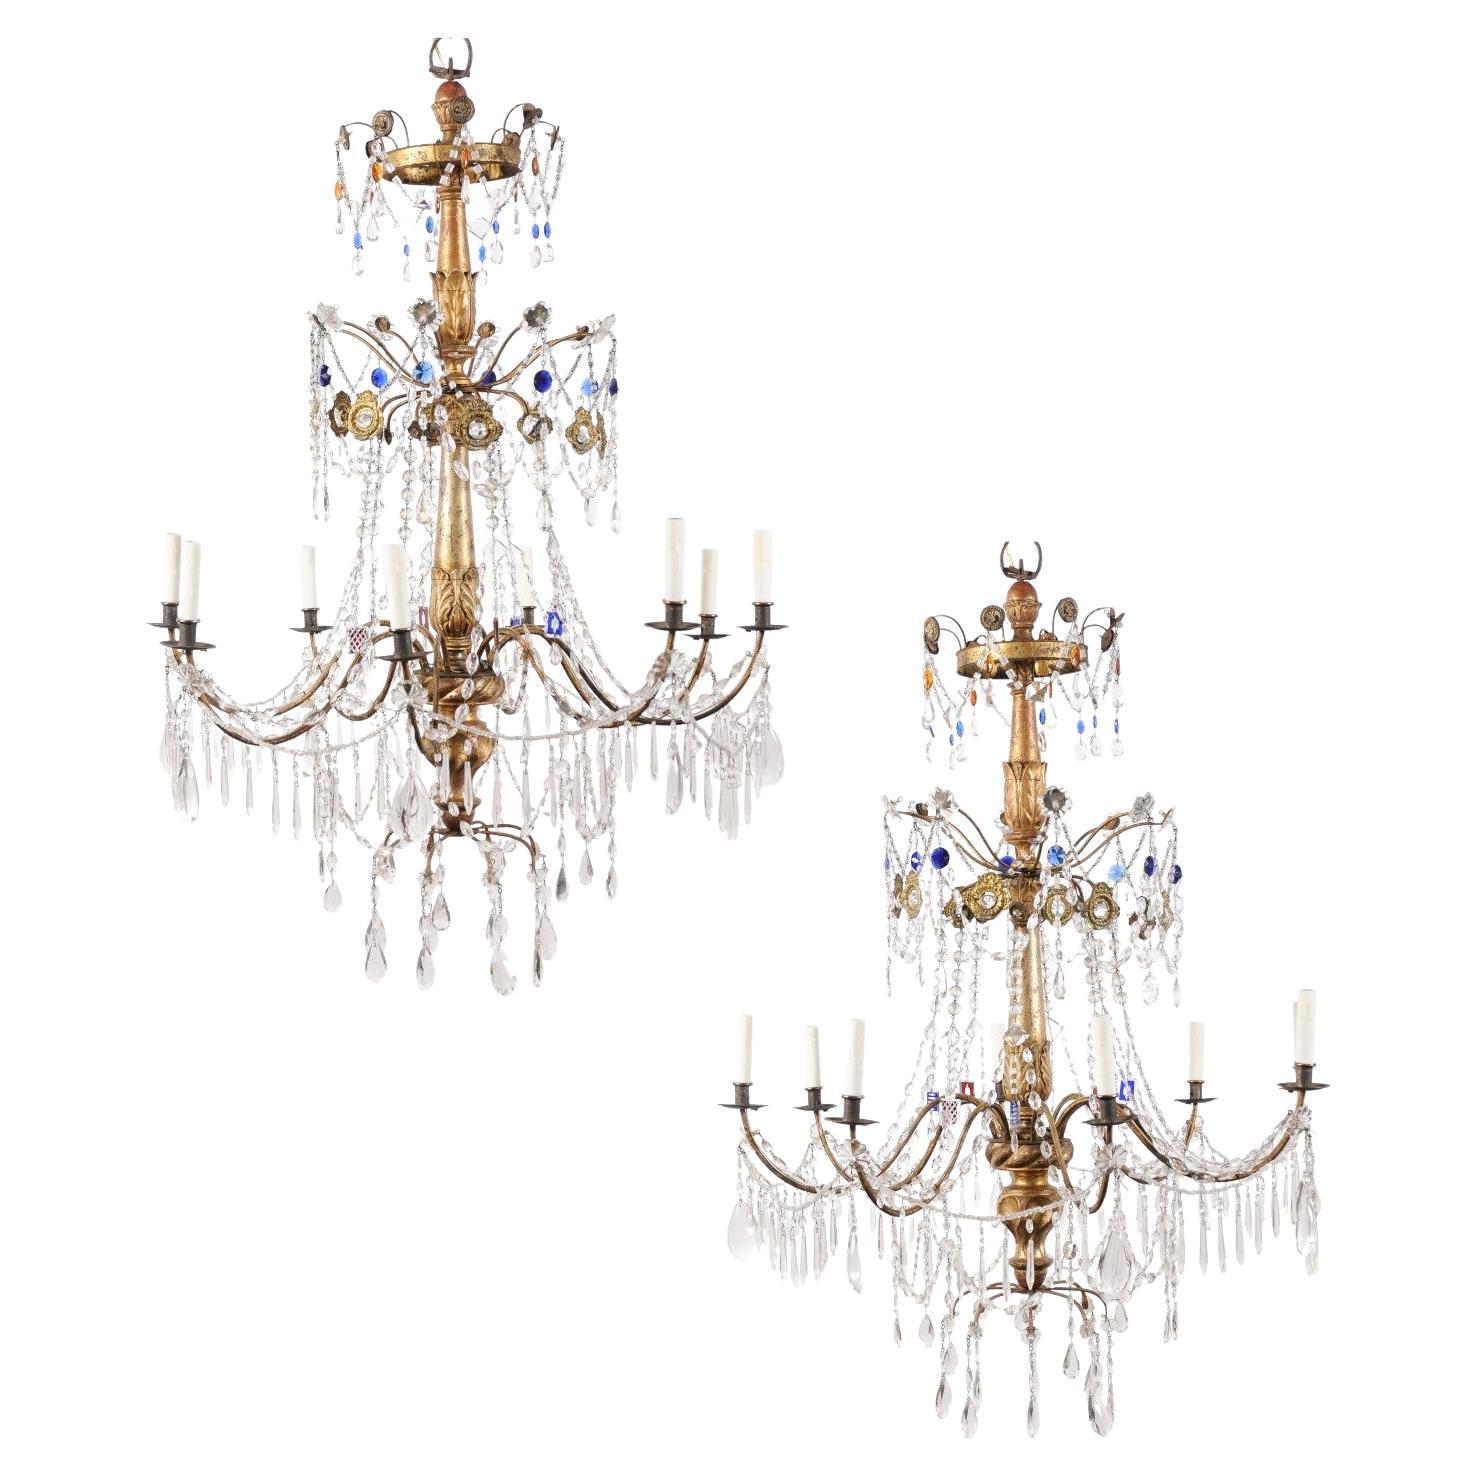 Pair of Italian Neoclassical Giltwood & Crystal 8 Light Chandelier